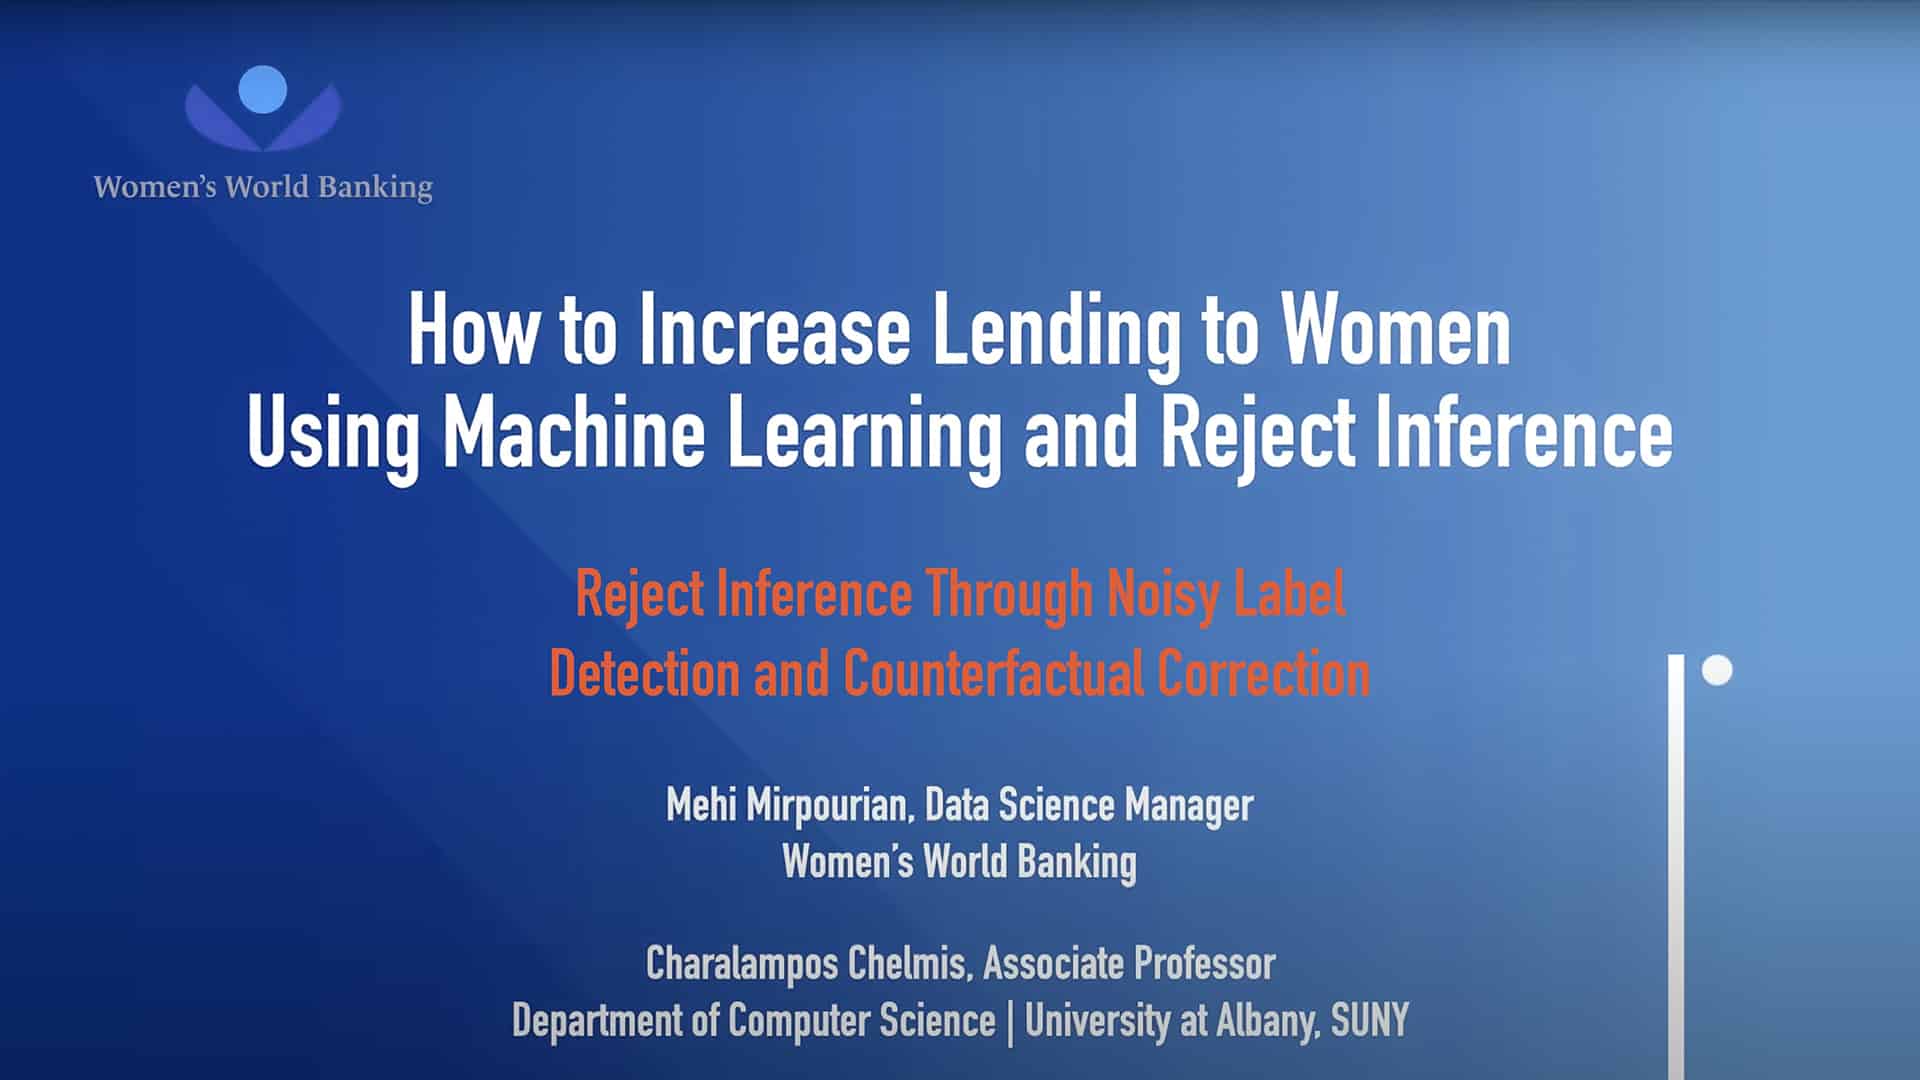 wwb courses Reject Inference Through Noisy Label Detection and Counterfactual Correction